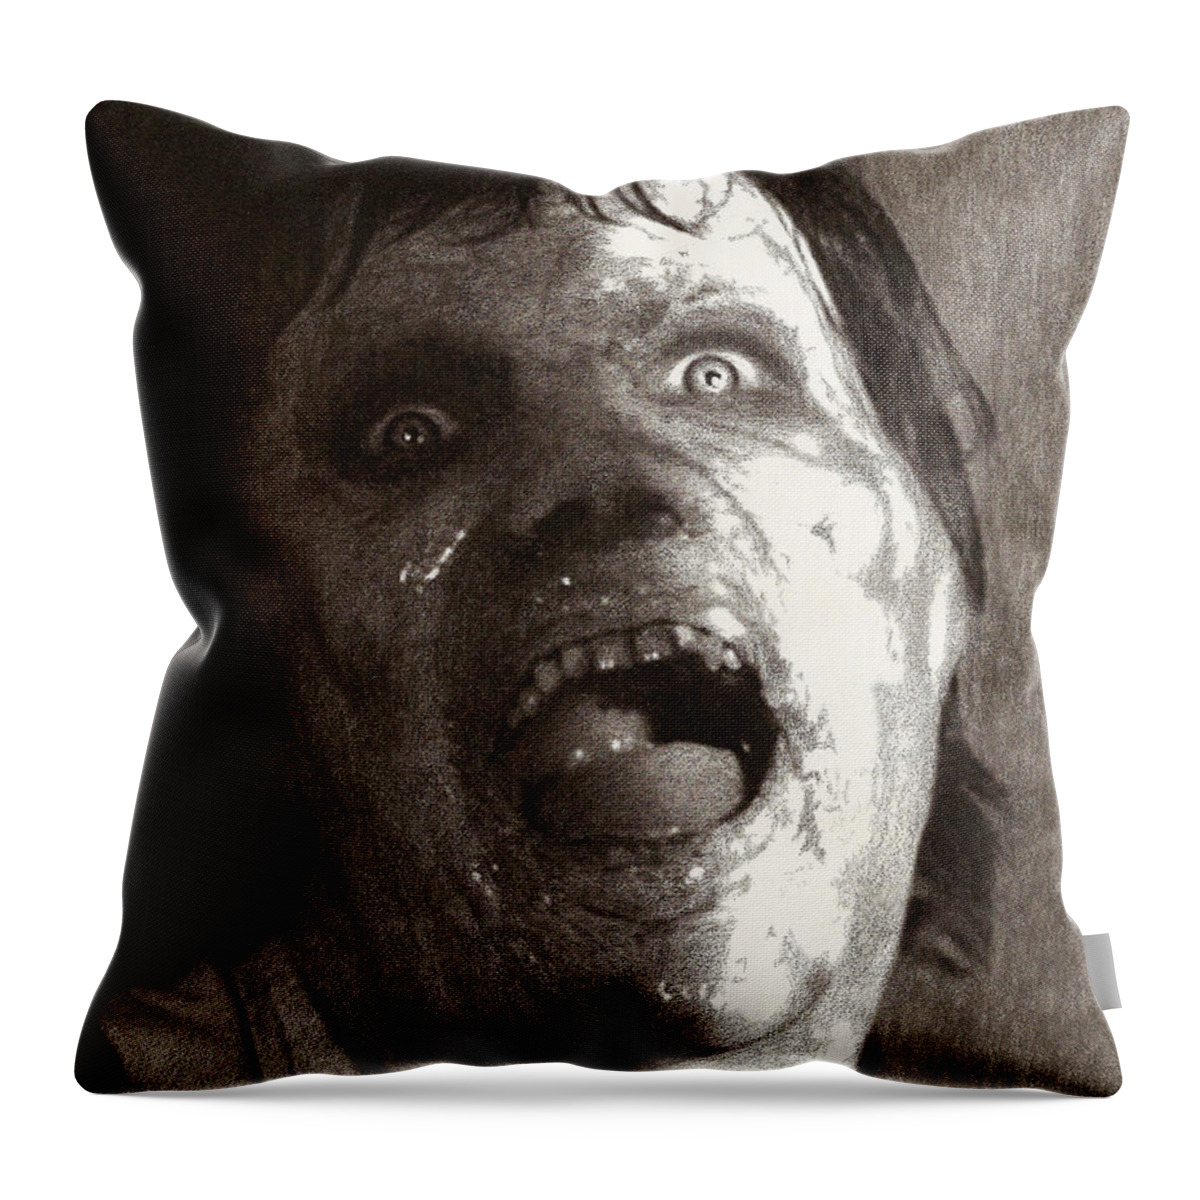 Horror Throw Pillow featuring the drawing Sonny Montelli by Mark Baranowski